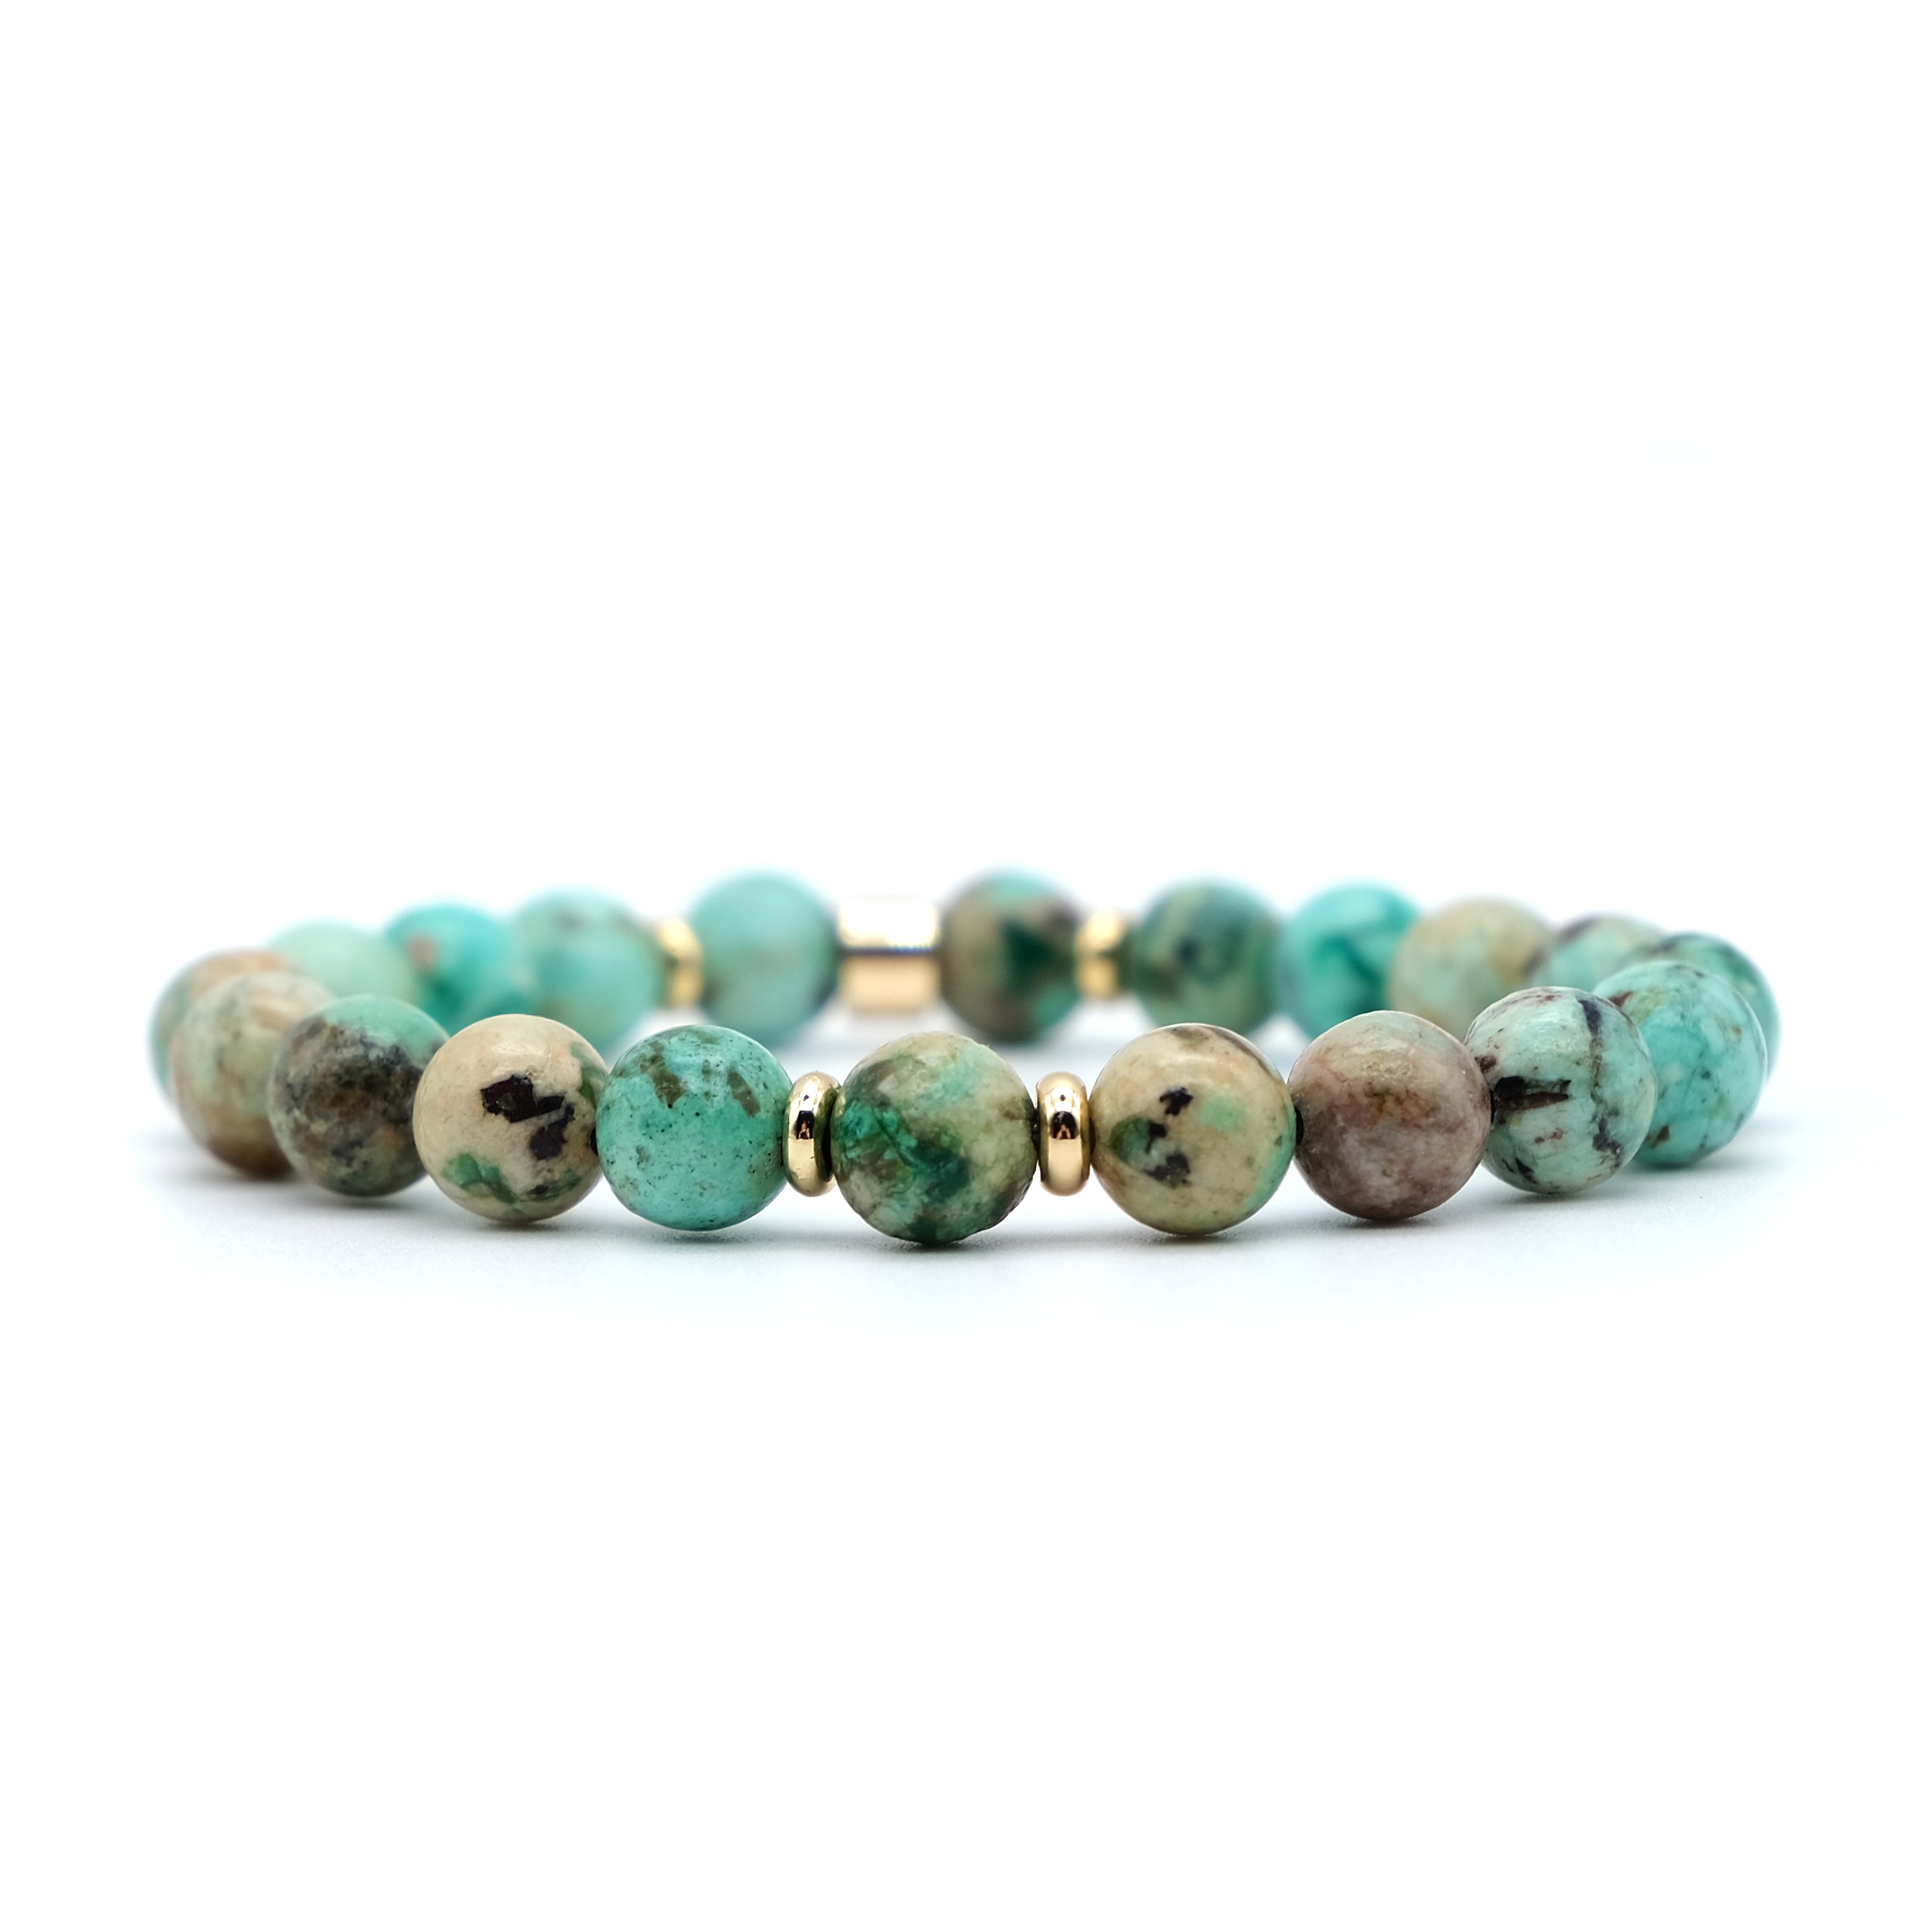 A chrysocolla gemstone bracelet in 8mm beads with gold accessories